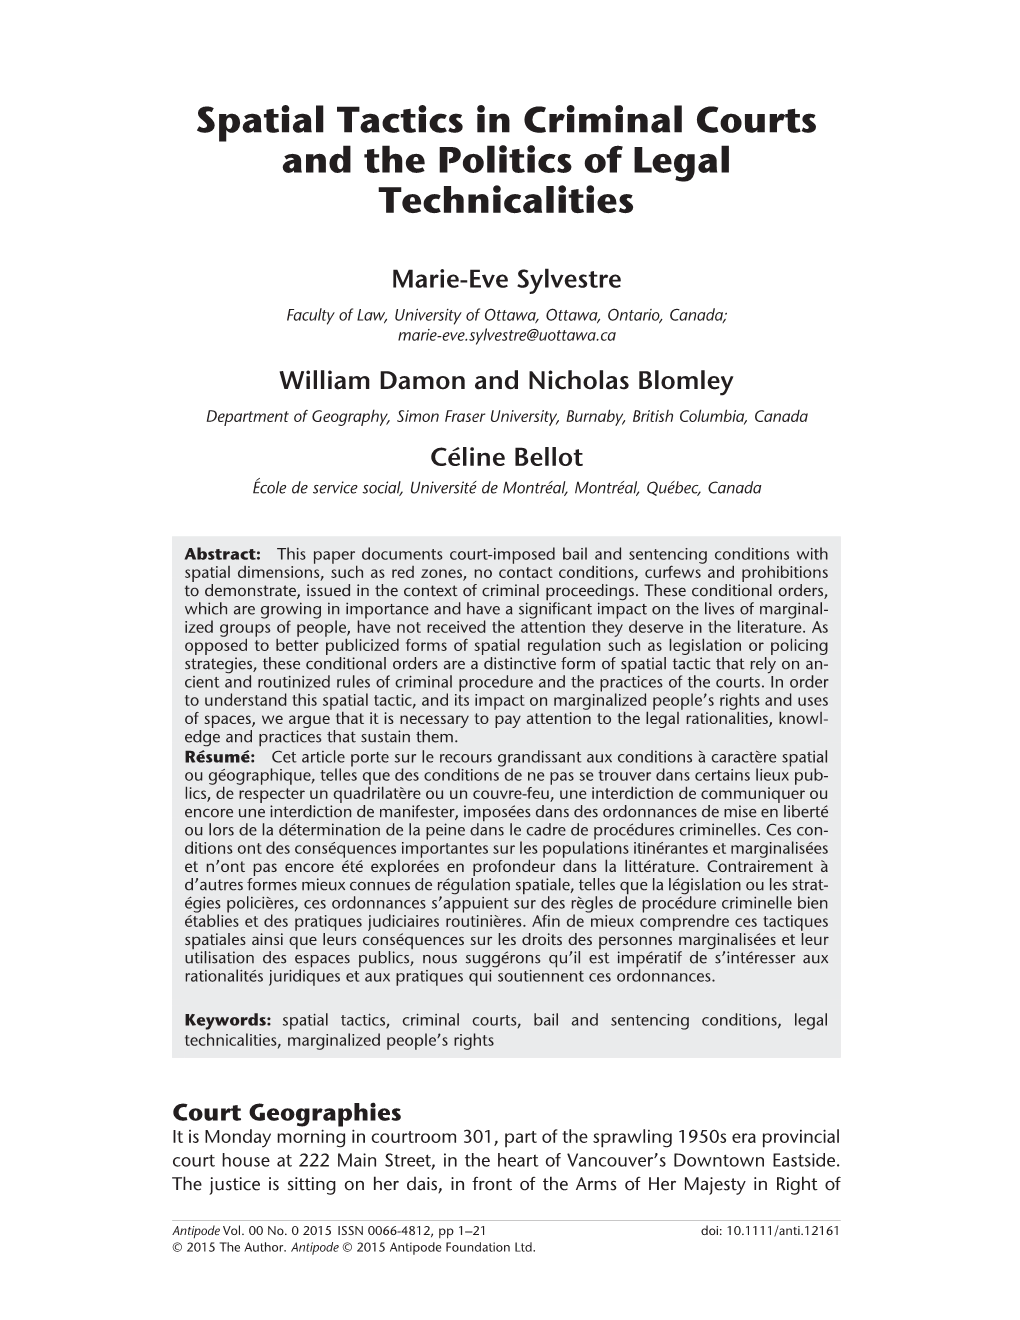 Spatial Tactics in Criminal Courts and the Politics of Legal Technicalities